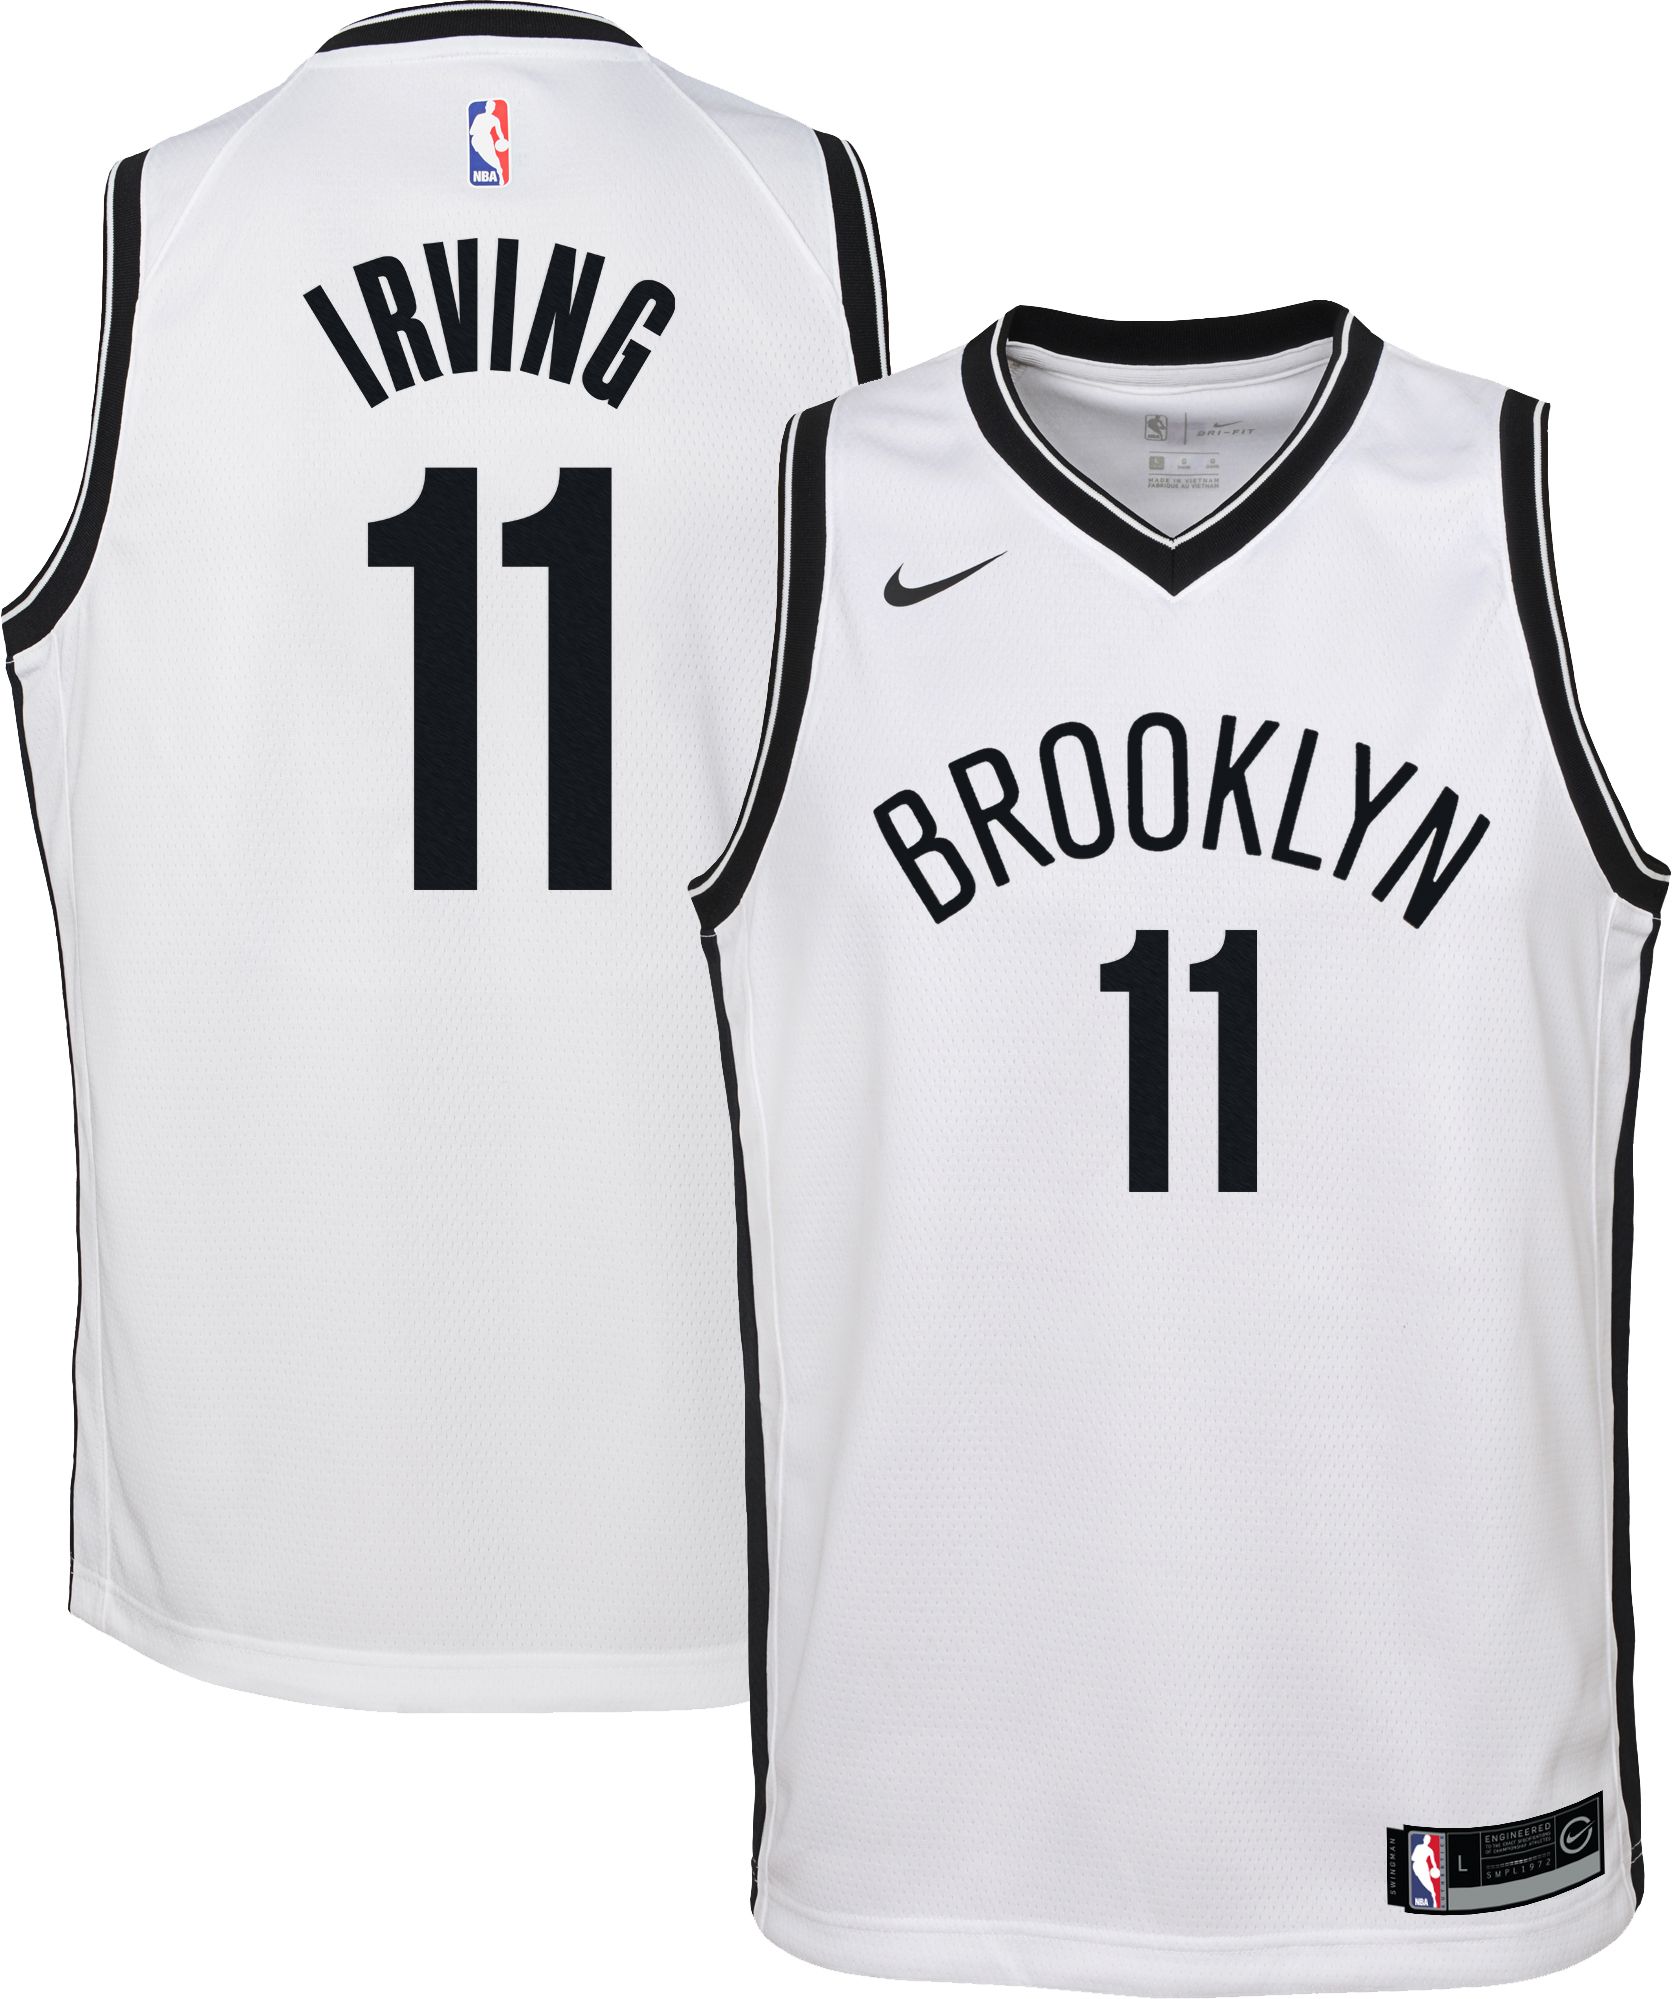 kyrie irving youth apparel